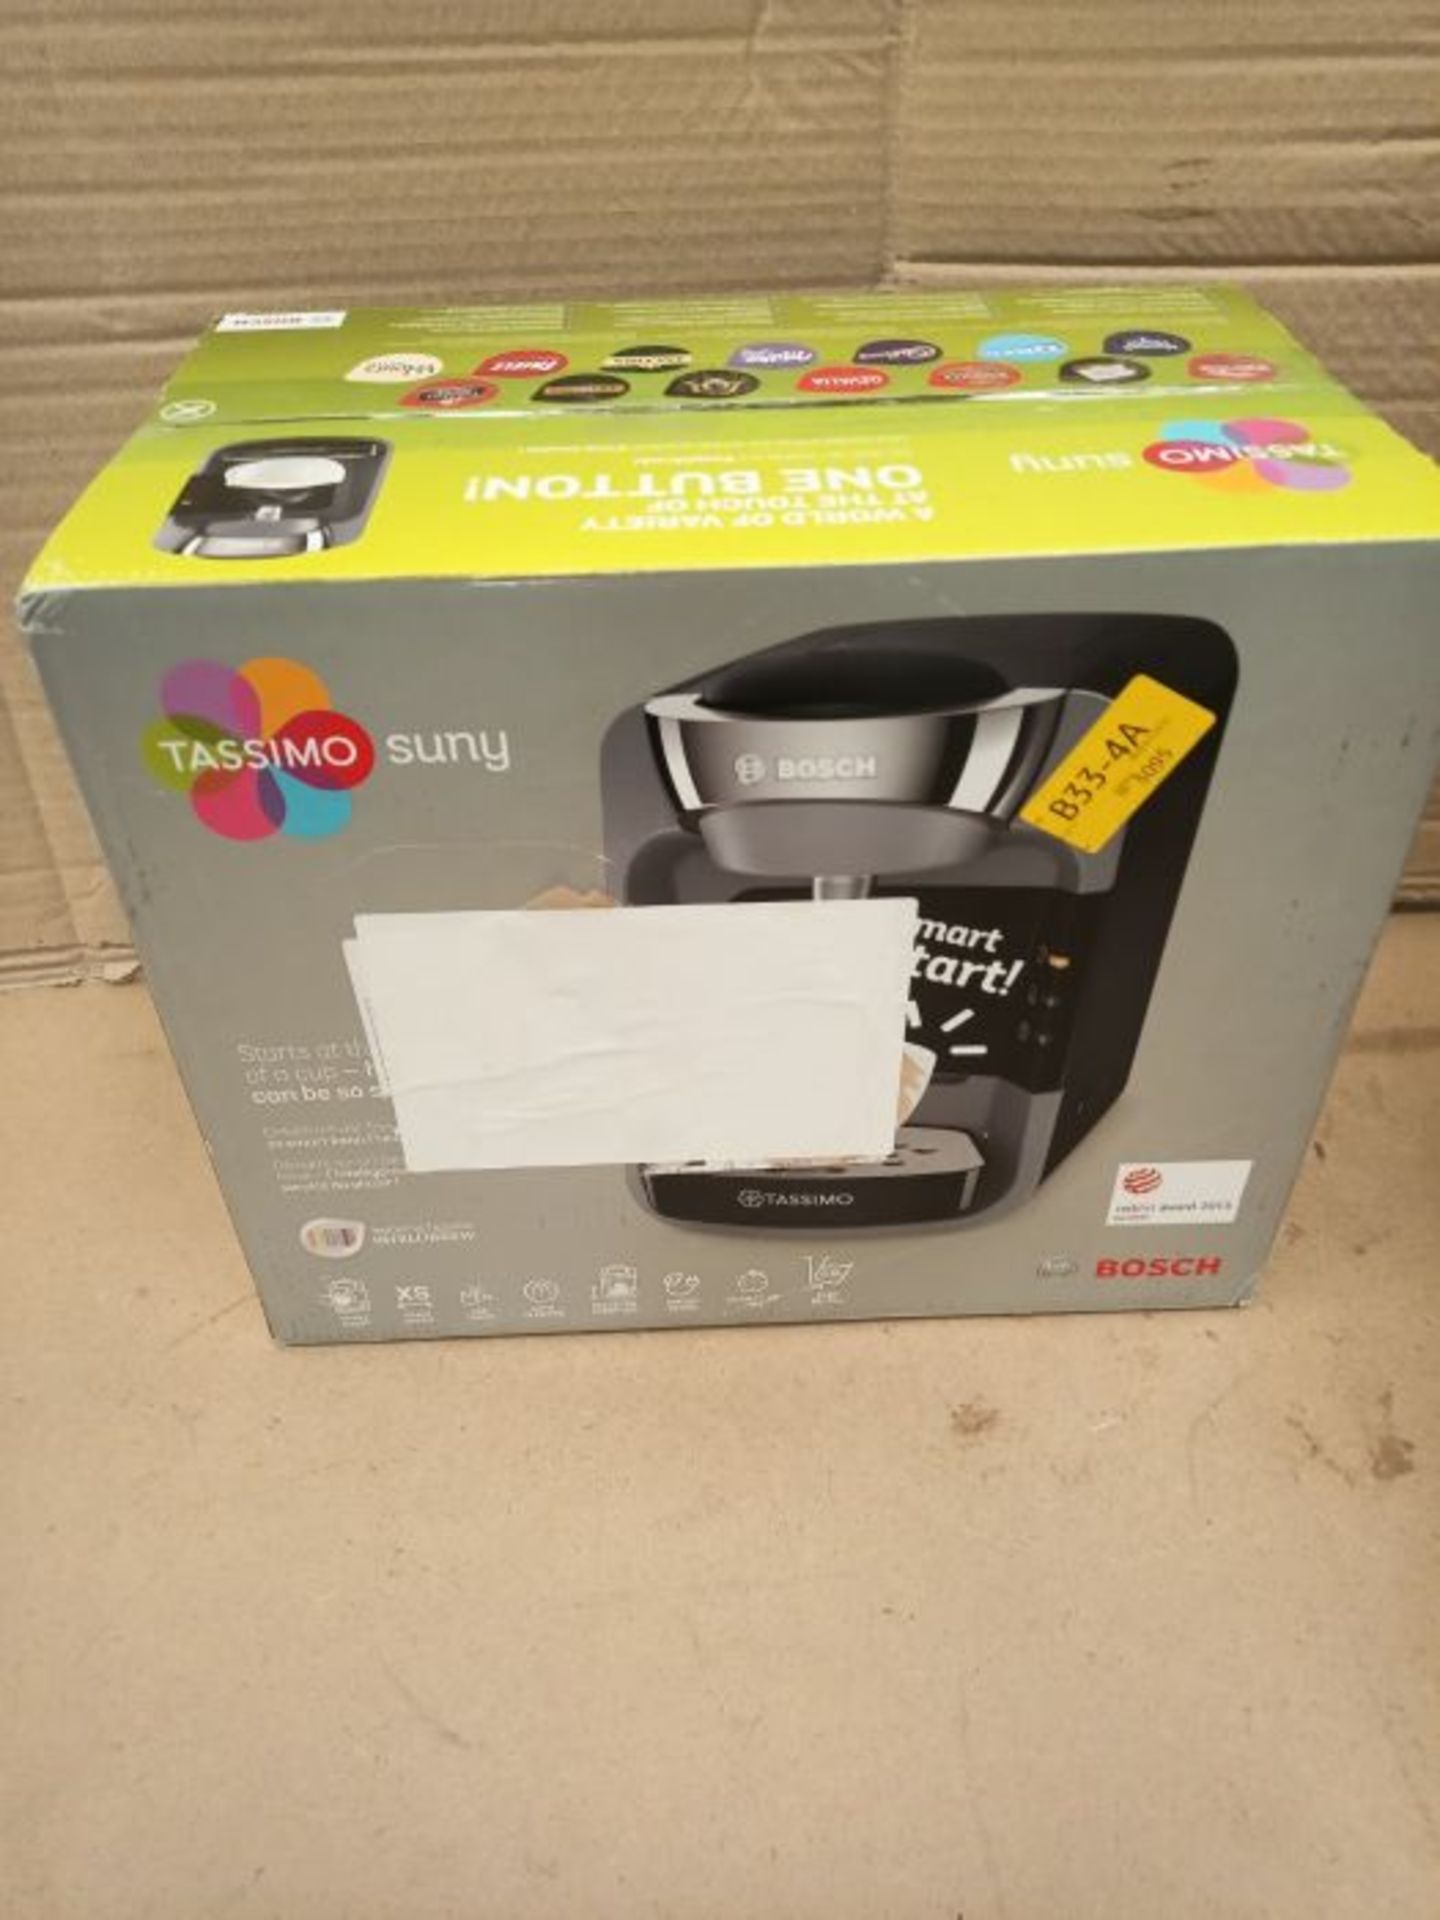 RRP £56.00 Bosch Tassimo Suny TAS3202 Capsule Machine, Stainless Steel, 1300 W, Midnight Black/An - Image 2 of 3